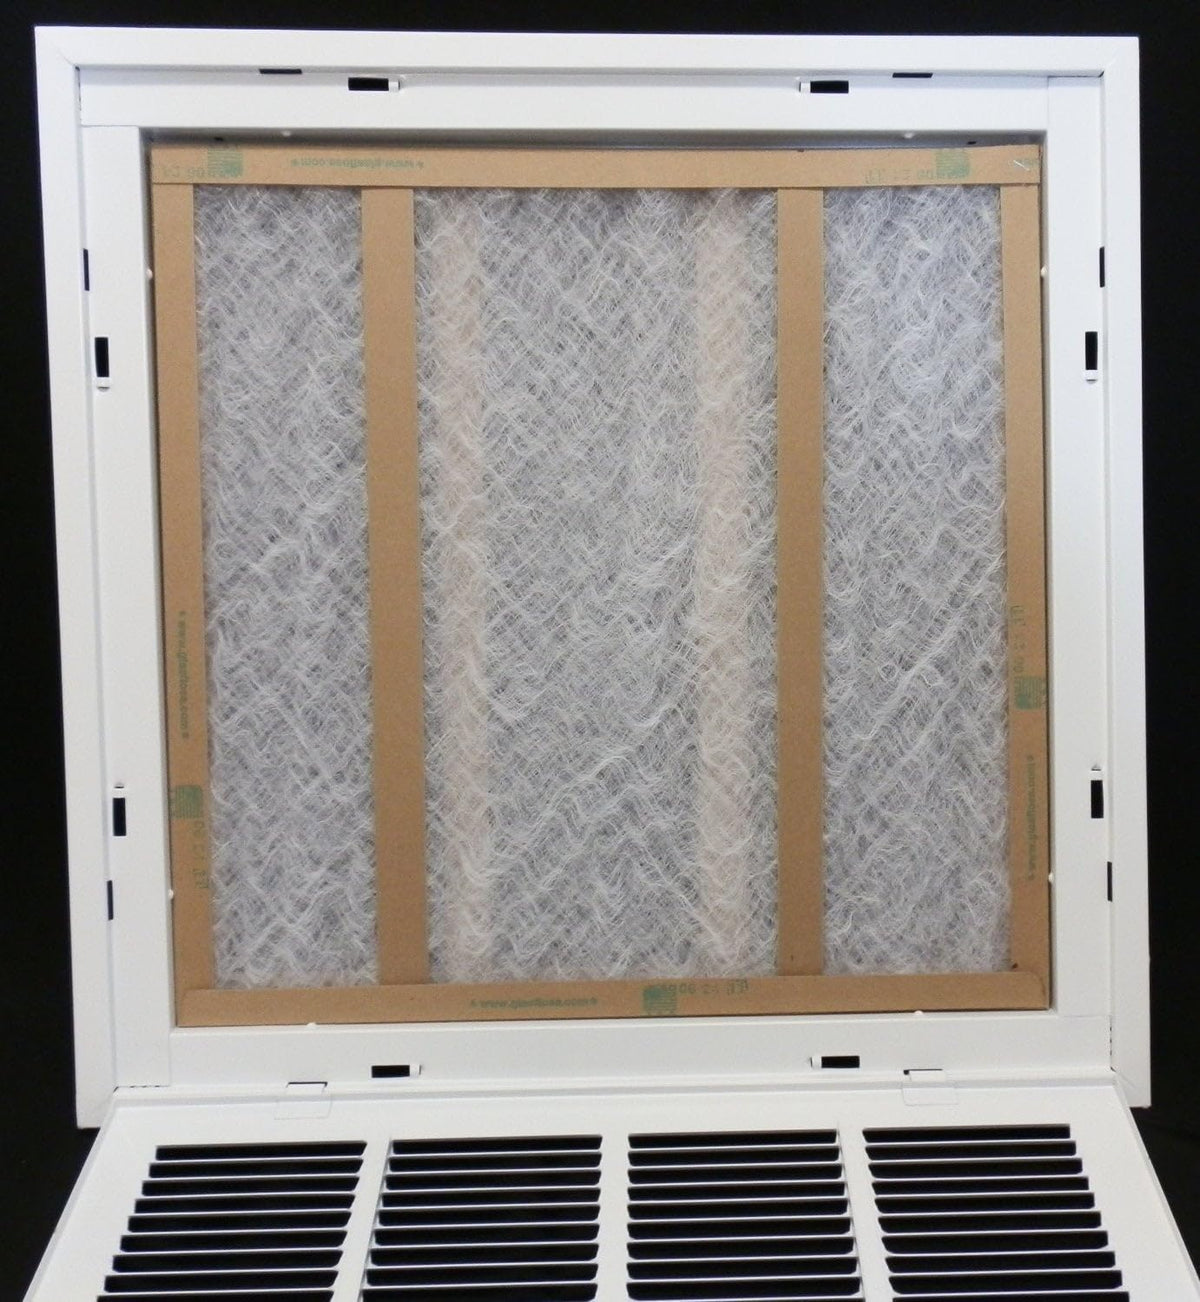 22&quot; X 28&quot; Steel Return Air Filter Grille for 1&quot; Filter - Removable Frame - [Outer Dimensions: 24 5/8&quot; X 30 5/8&quot;]